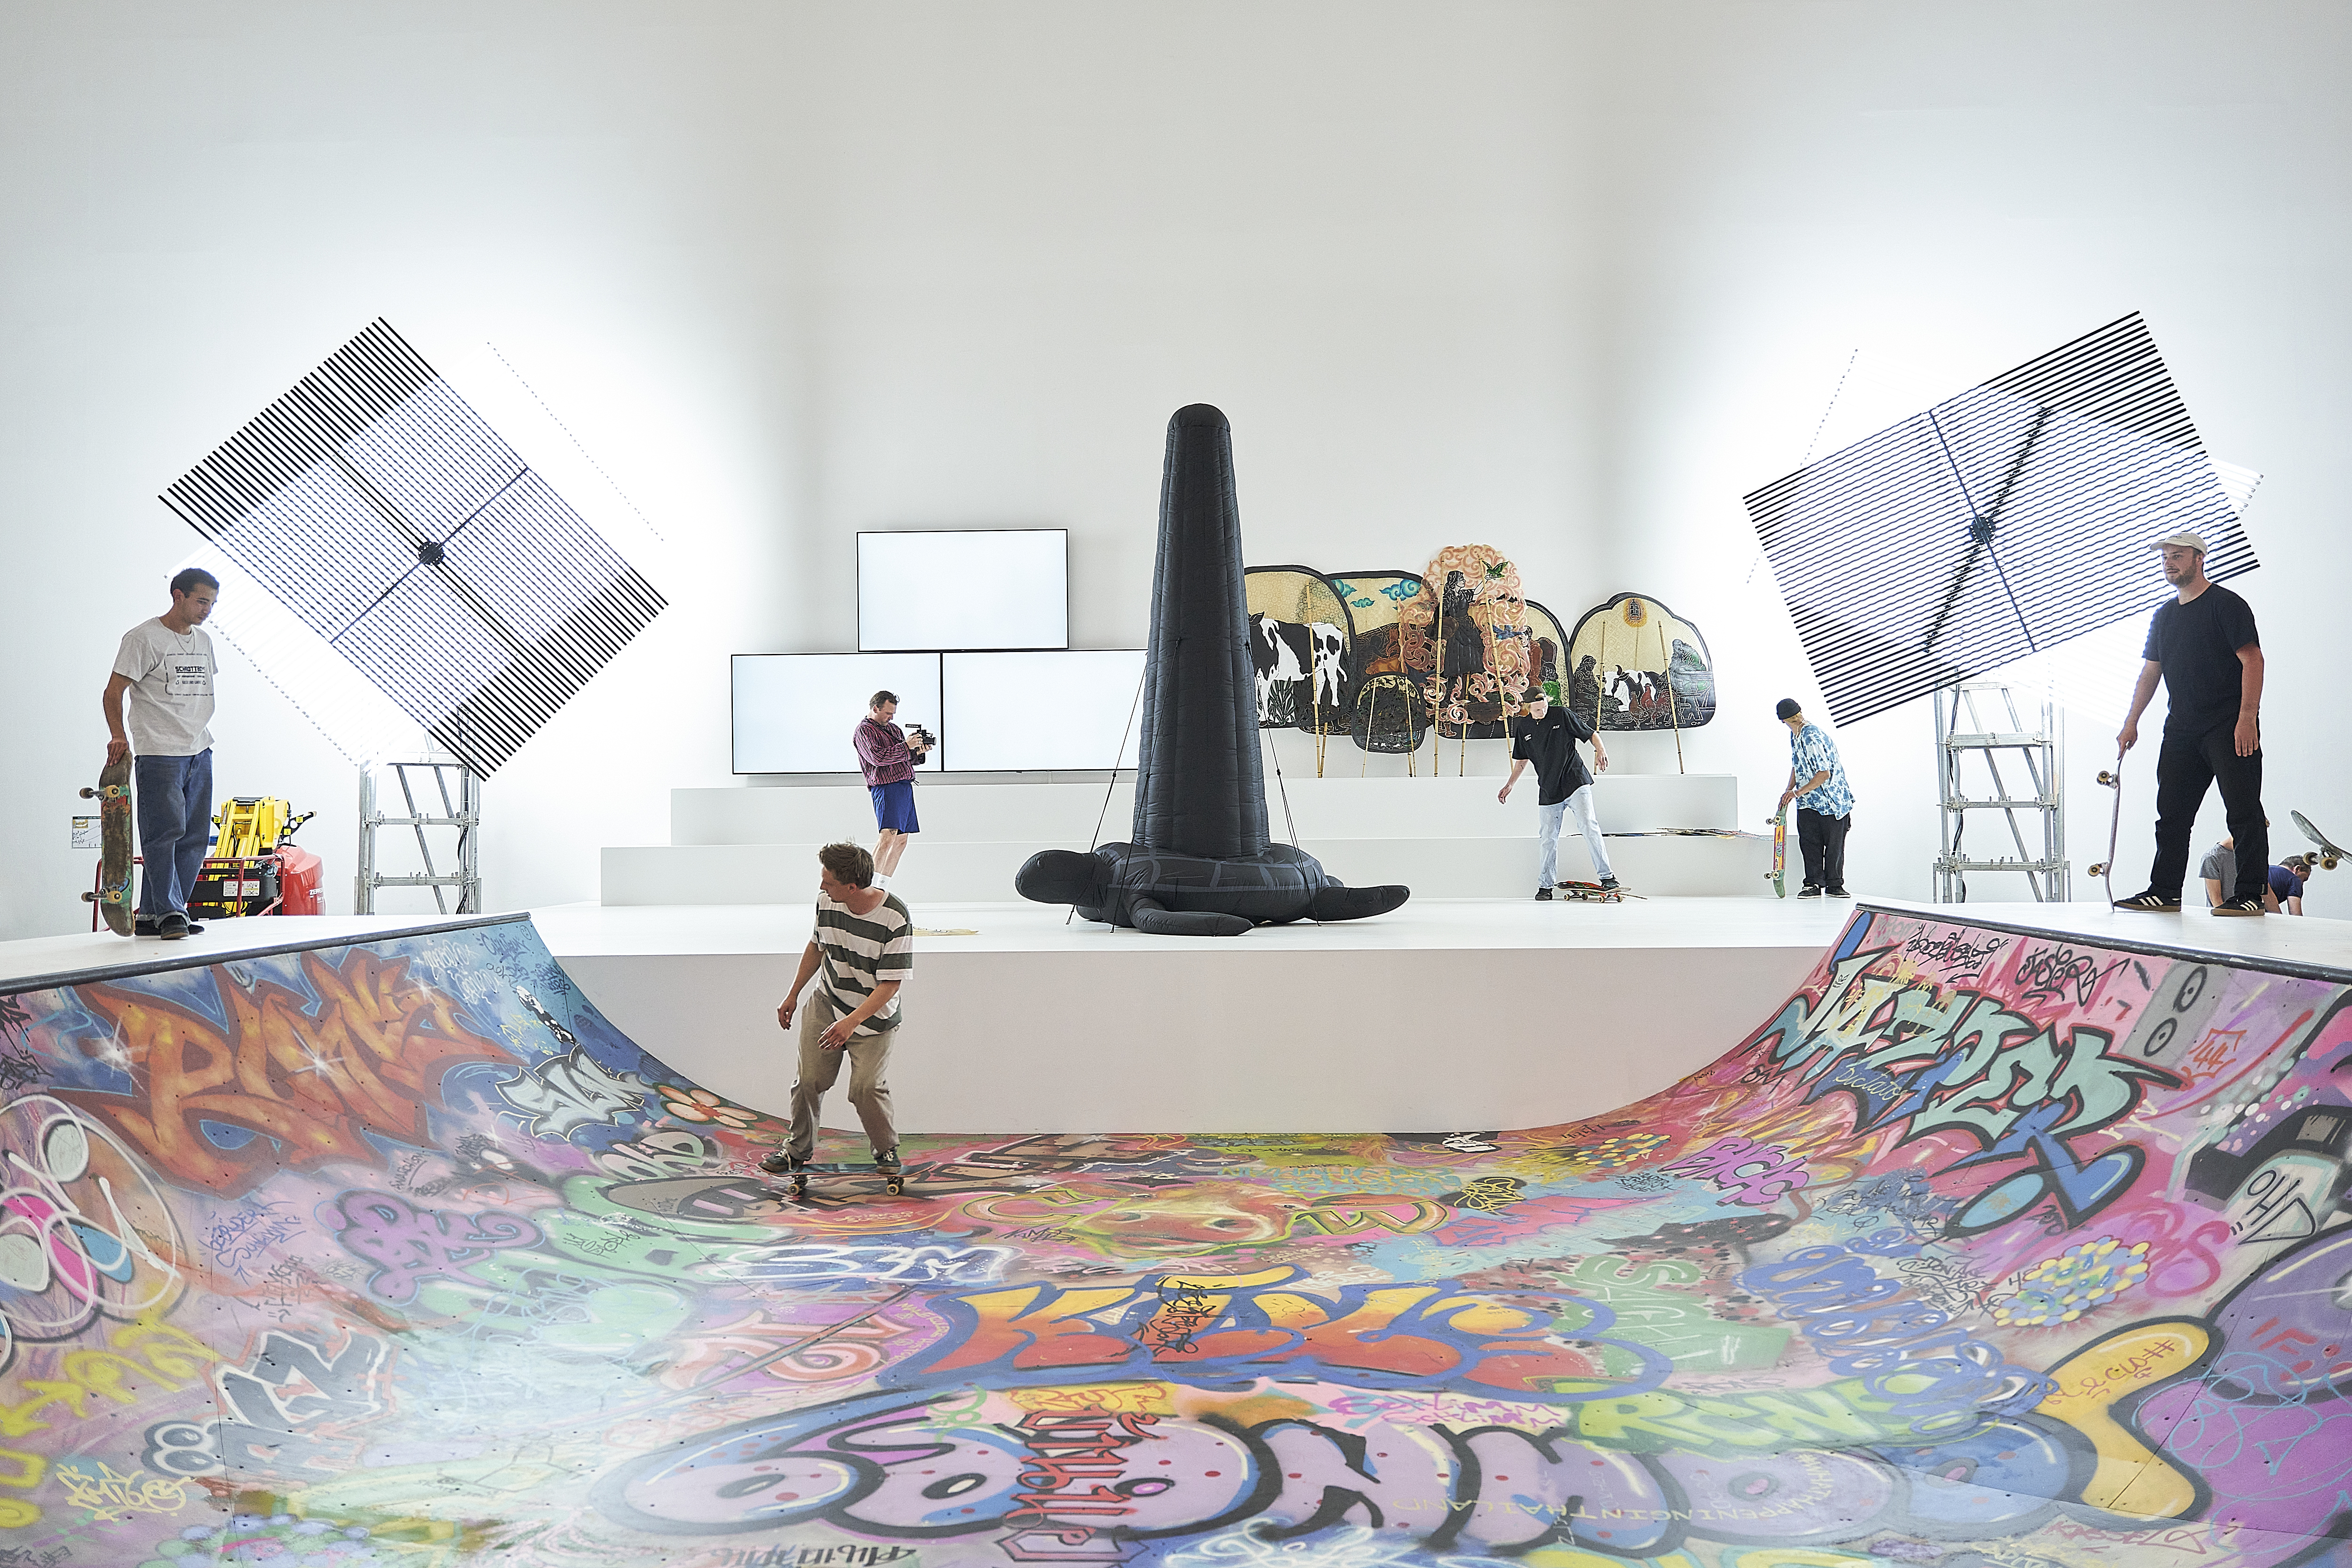 documenta fifteen: Baan Noorg Collaborative Arts and Culture, The Rituals of Things, 2022, installation view, Fridericianum, Kassel, June 13, 2022, Photo: Nicolas Wefers